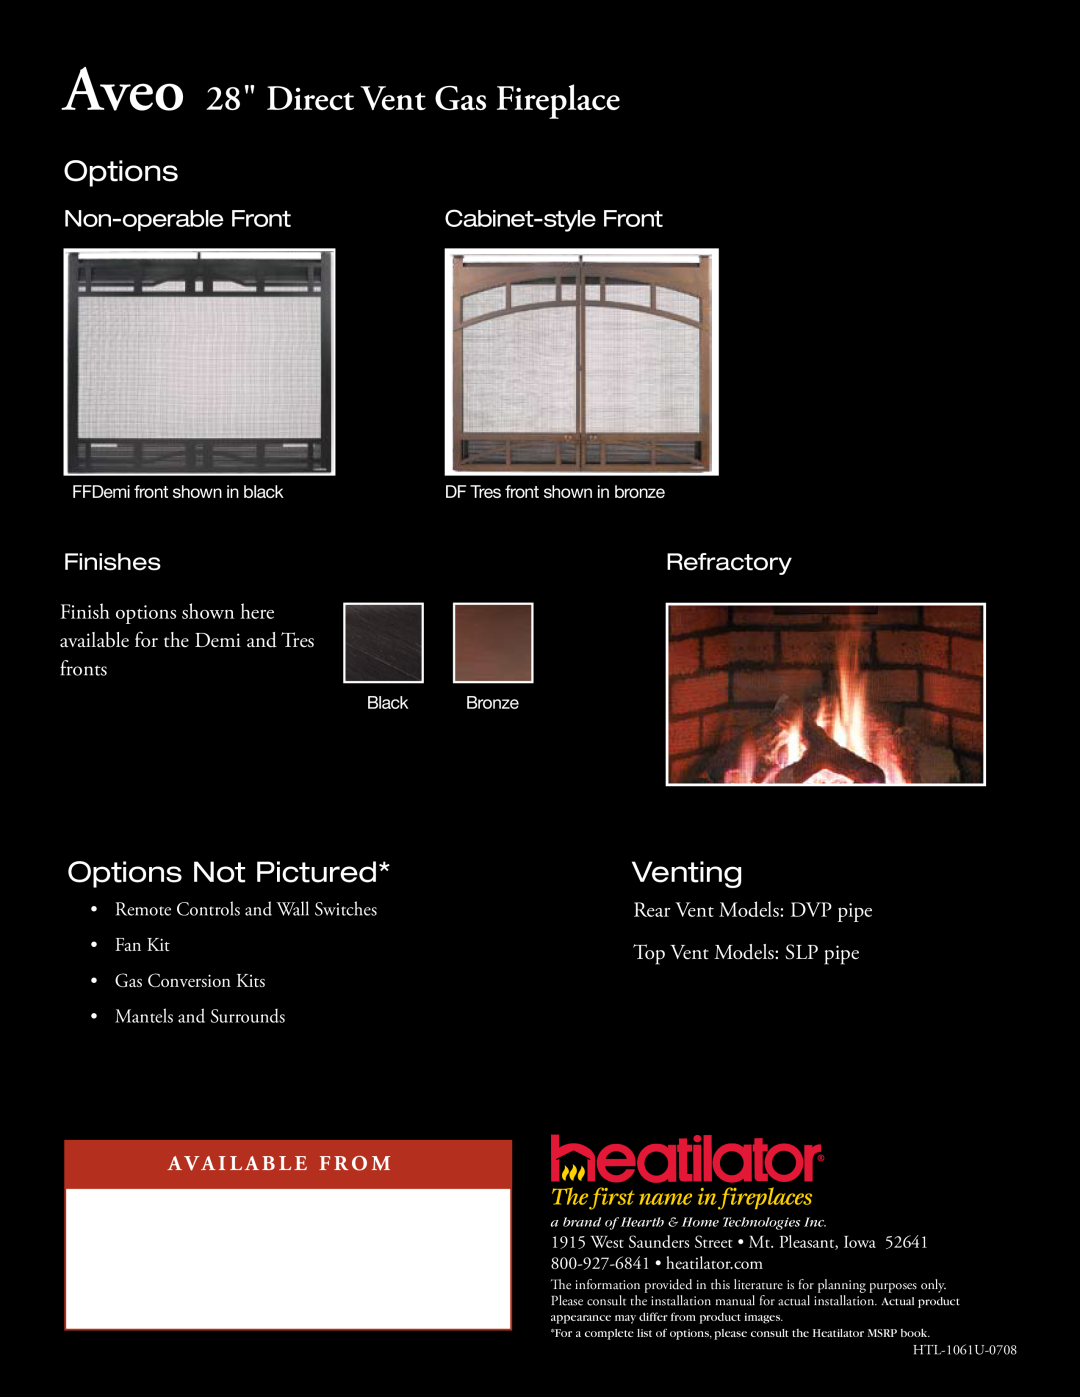 Hearth and Home Technologies Aveo 28 Direct Vent Gas Fireplace, Options Not Pictured, Venting, Non-operable Front 